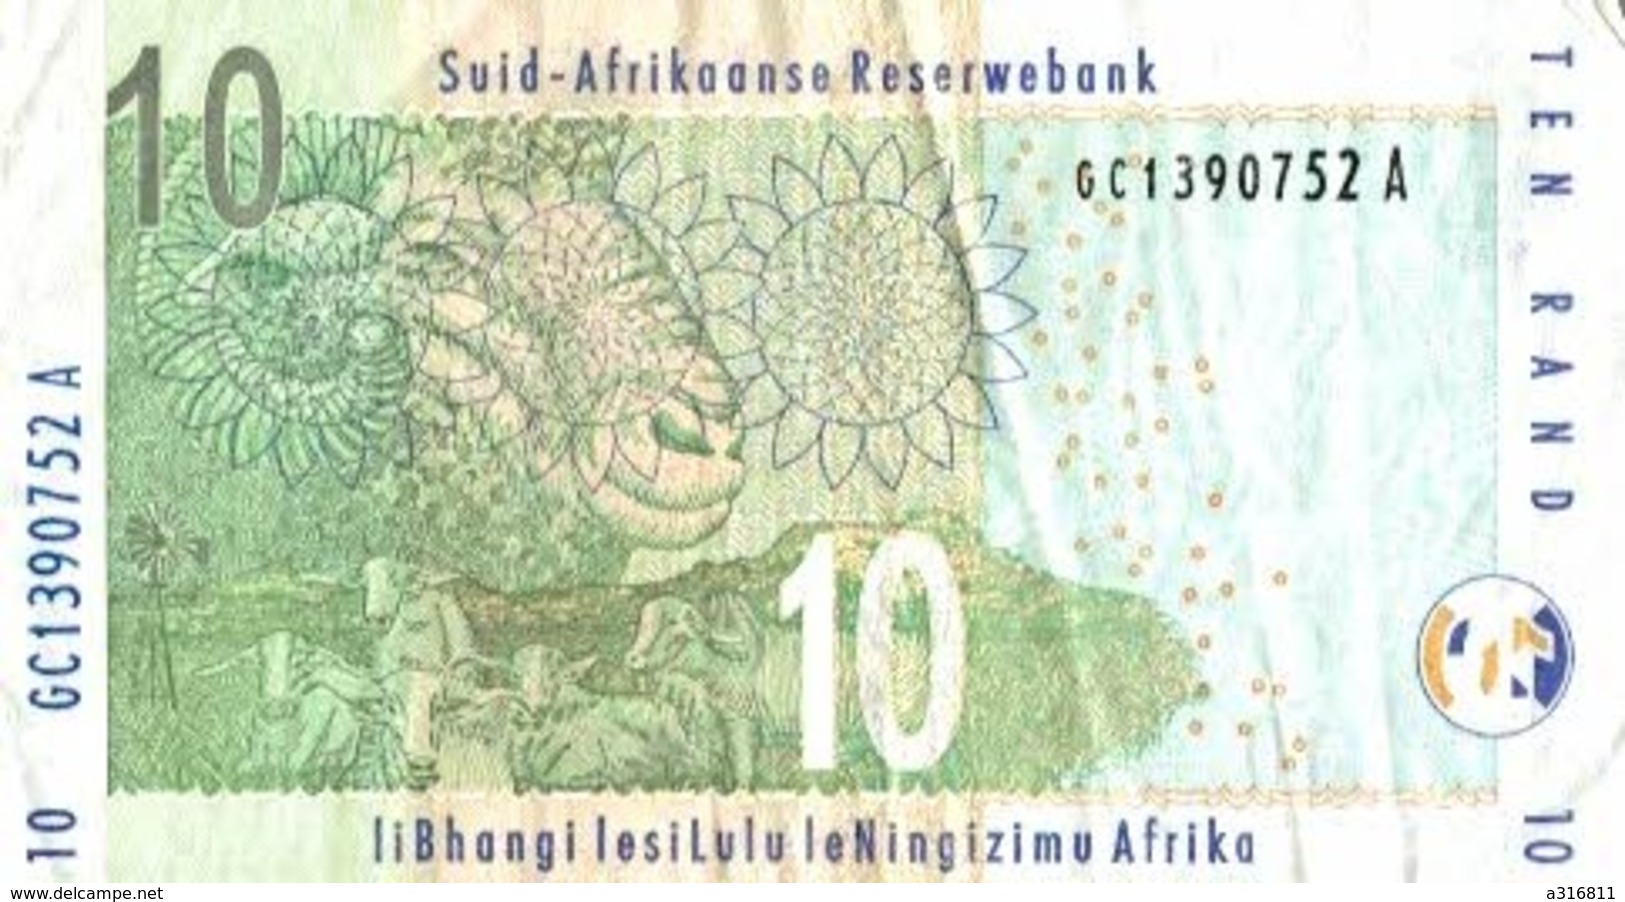 SOUTH AFRICA - SOUTH AFRICAN RESERVE BANK - 10 RAND - Afrique Du Sud